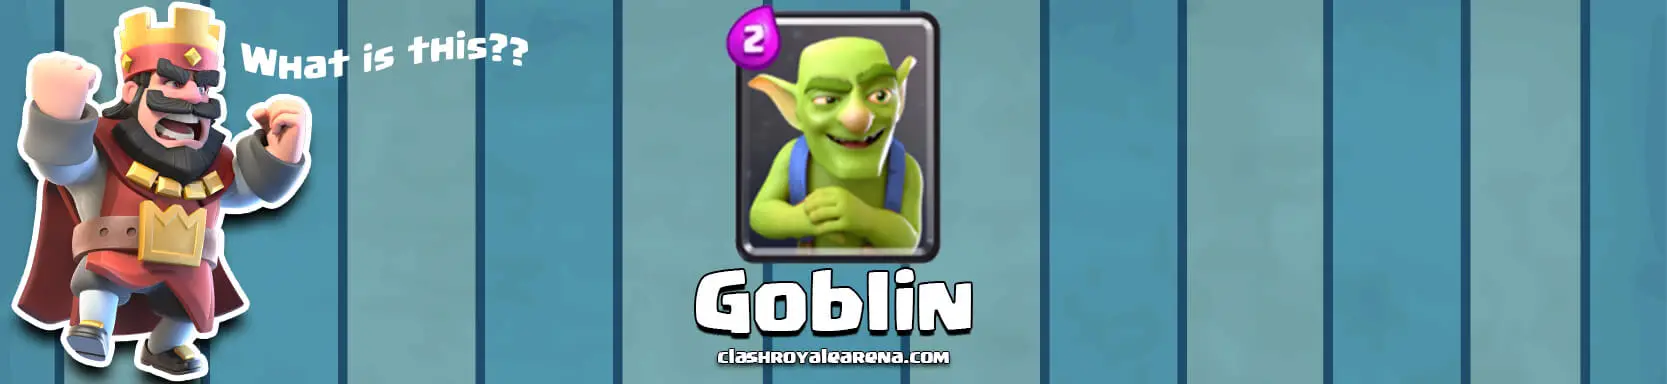 Goblins Clash Royale - Strategies and Statistics